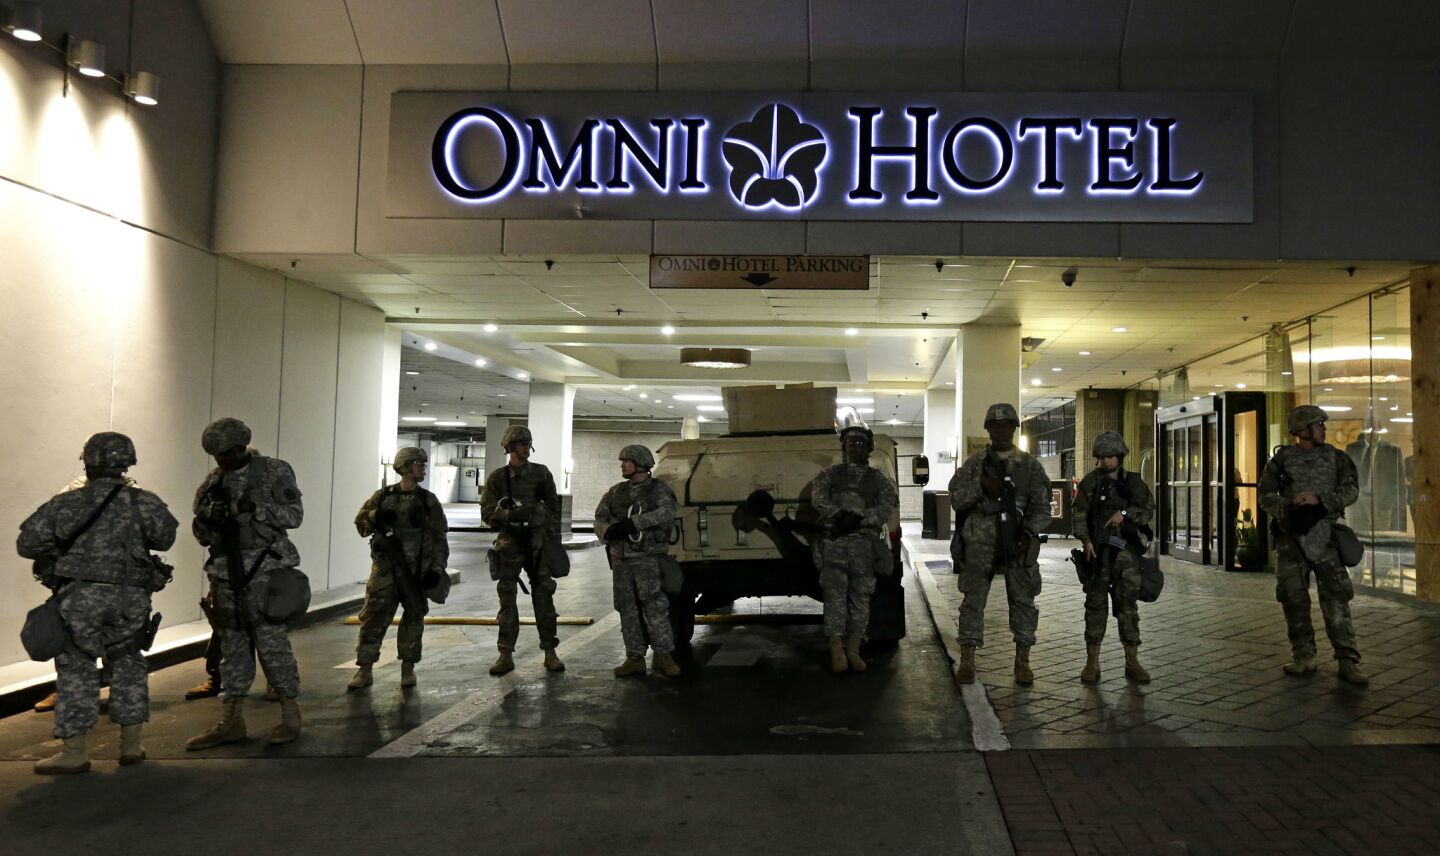 Members of the North Carolina National Guard stand guard outside the Omni Hotel in downtown Charlotte on Thursday.